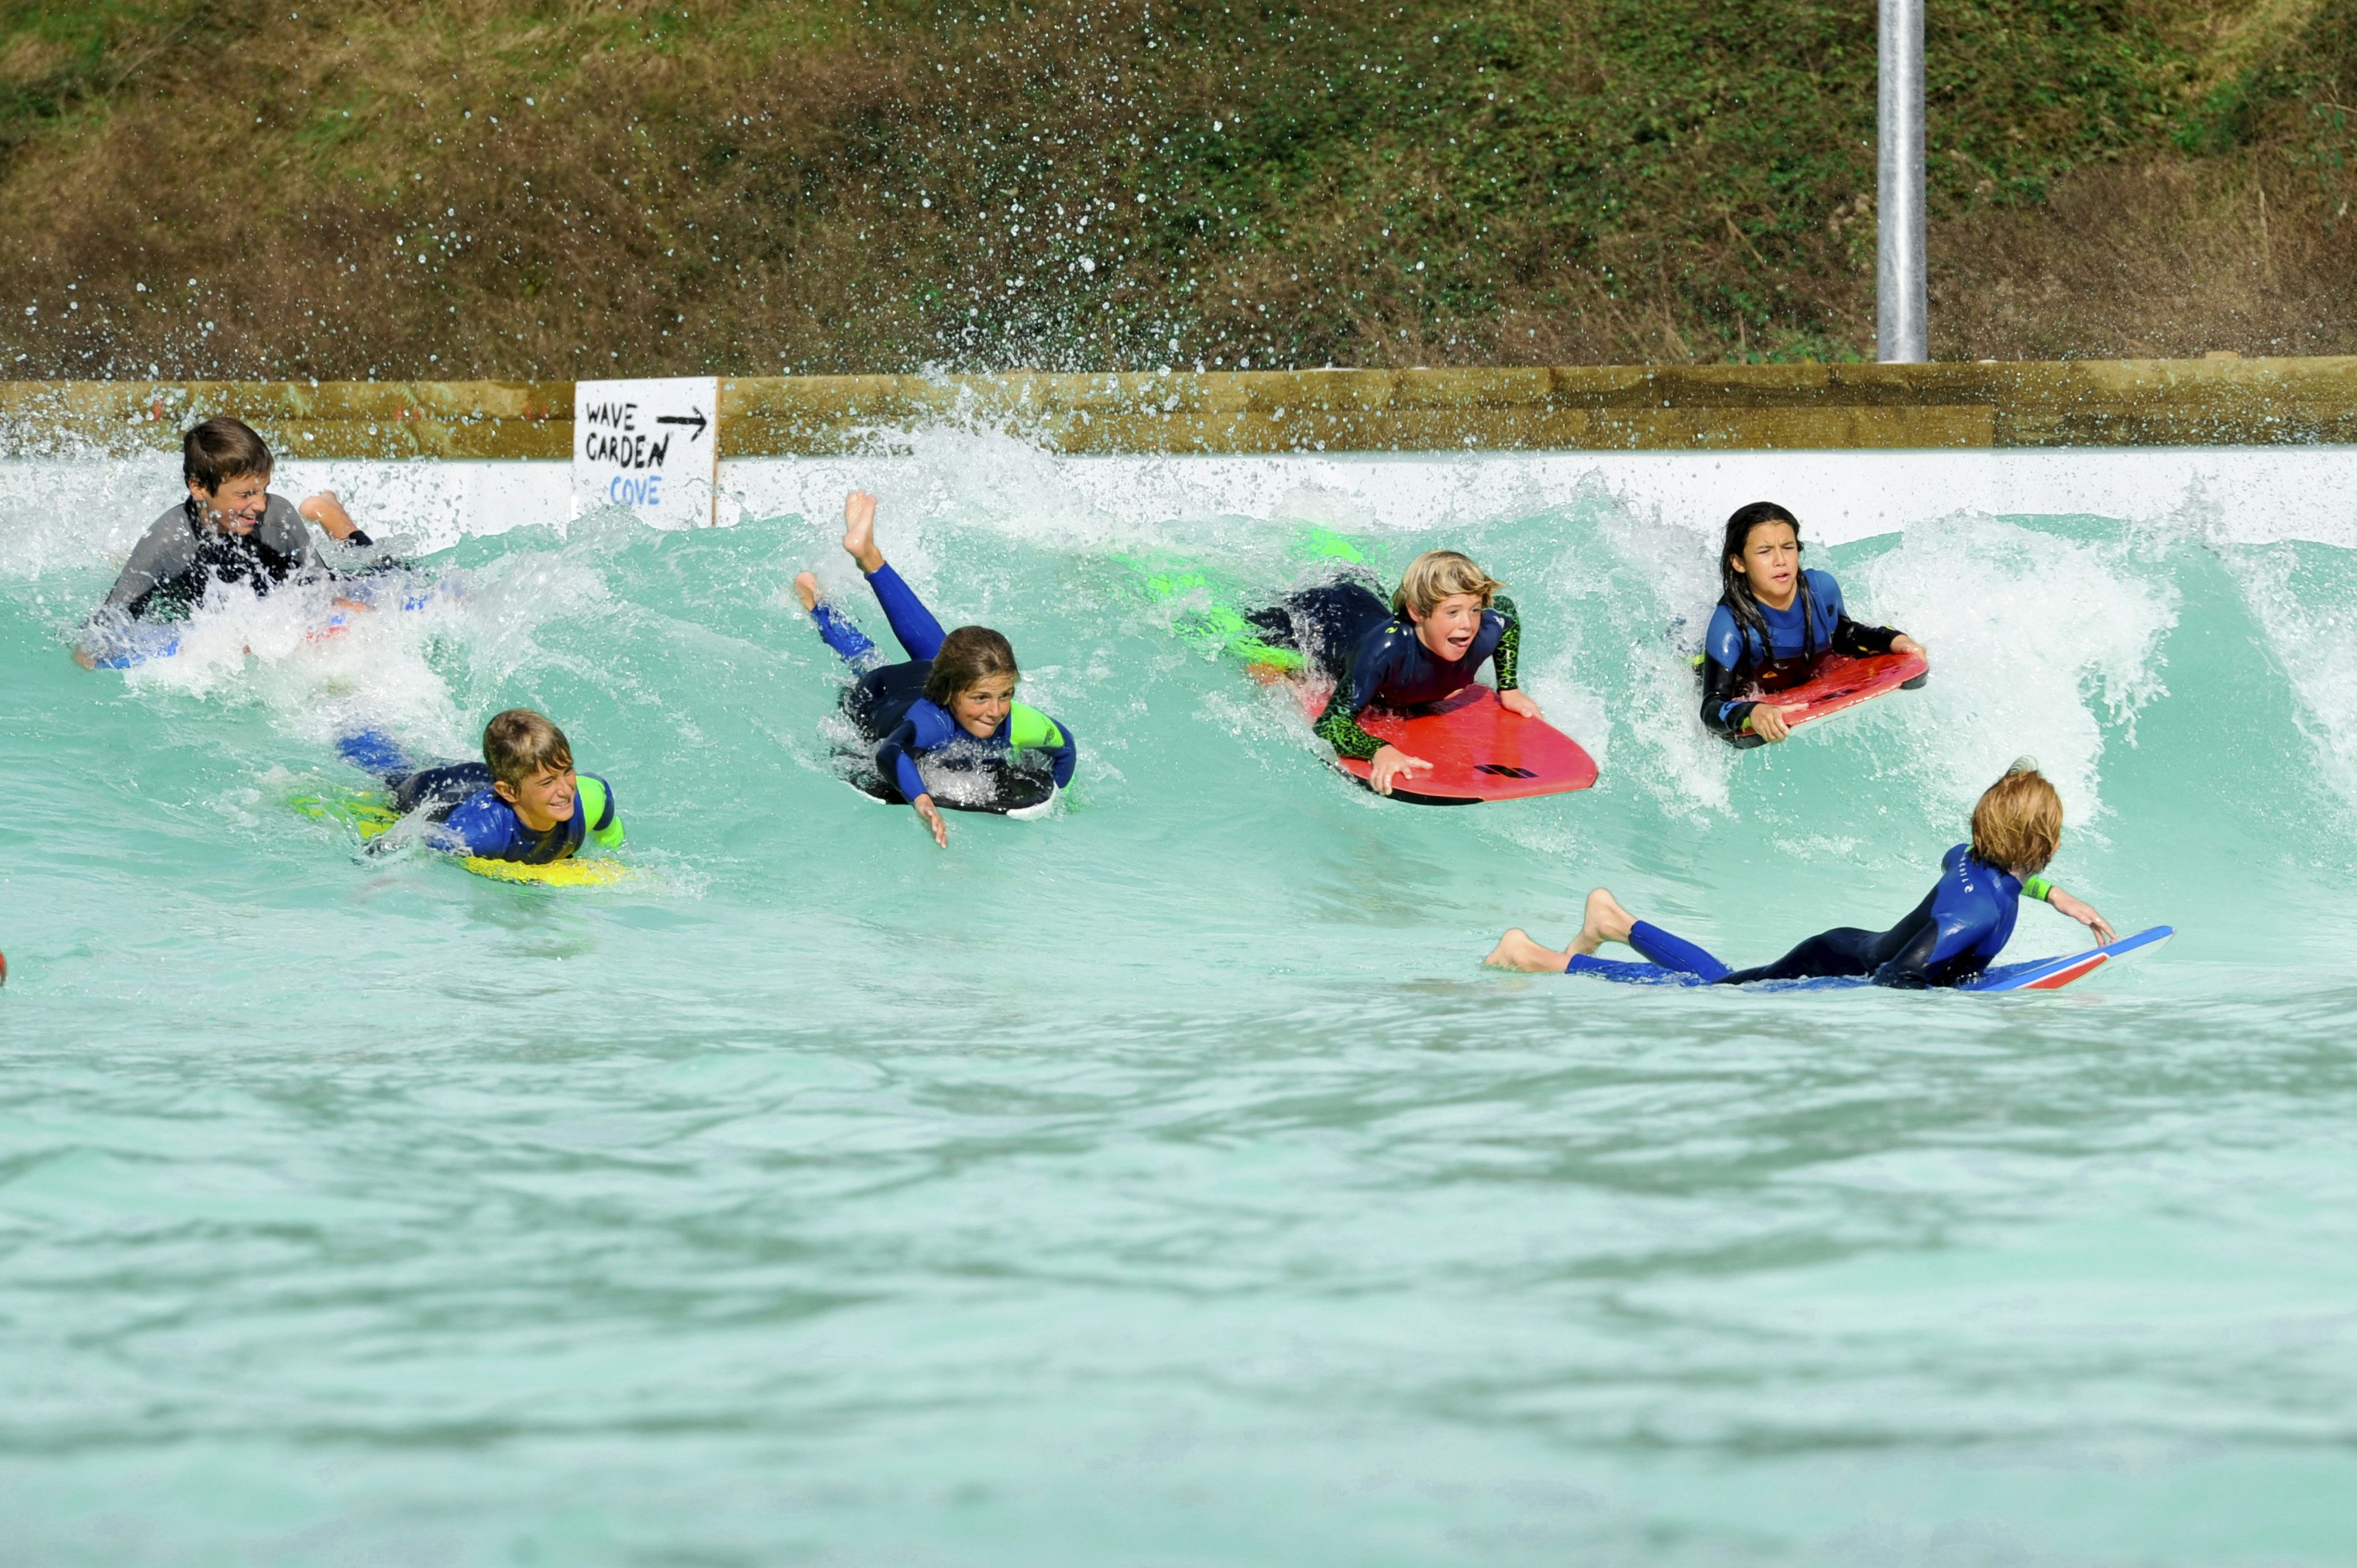 Young surfers riding waves at an inland surf park on a sunny day